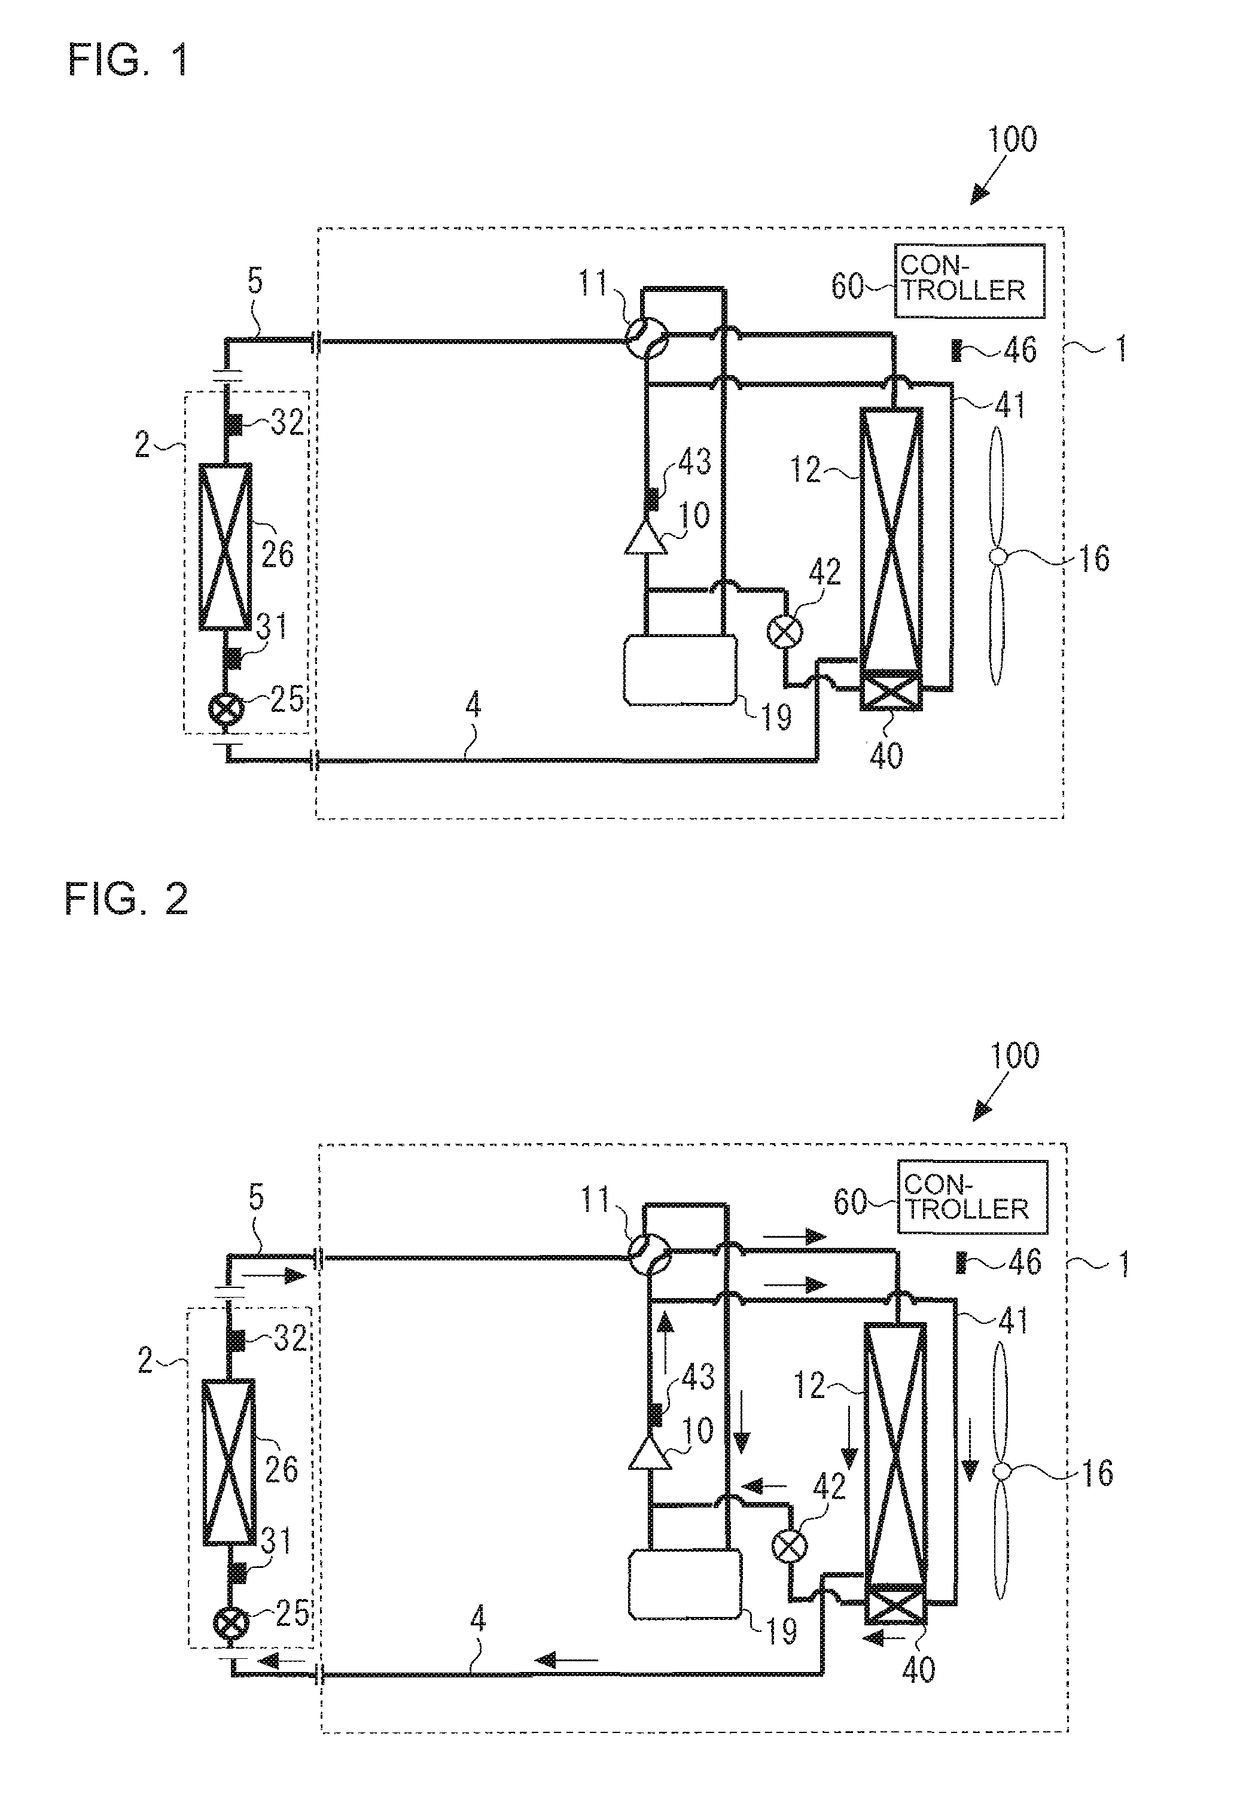 Heat pump with an auxiliary heat exchanger for compressor discharge temperature control